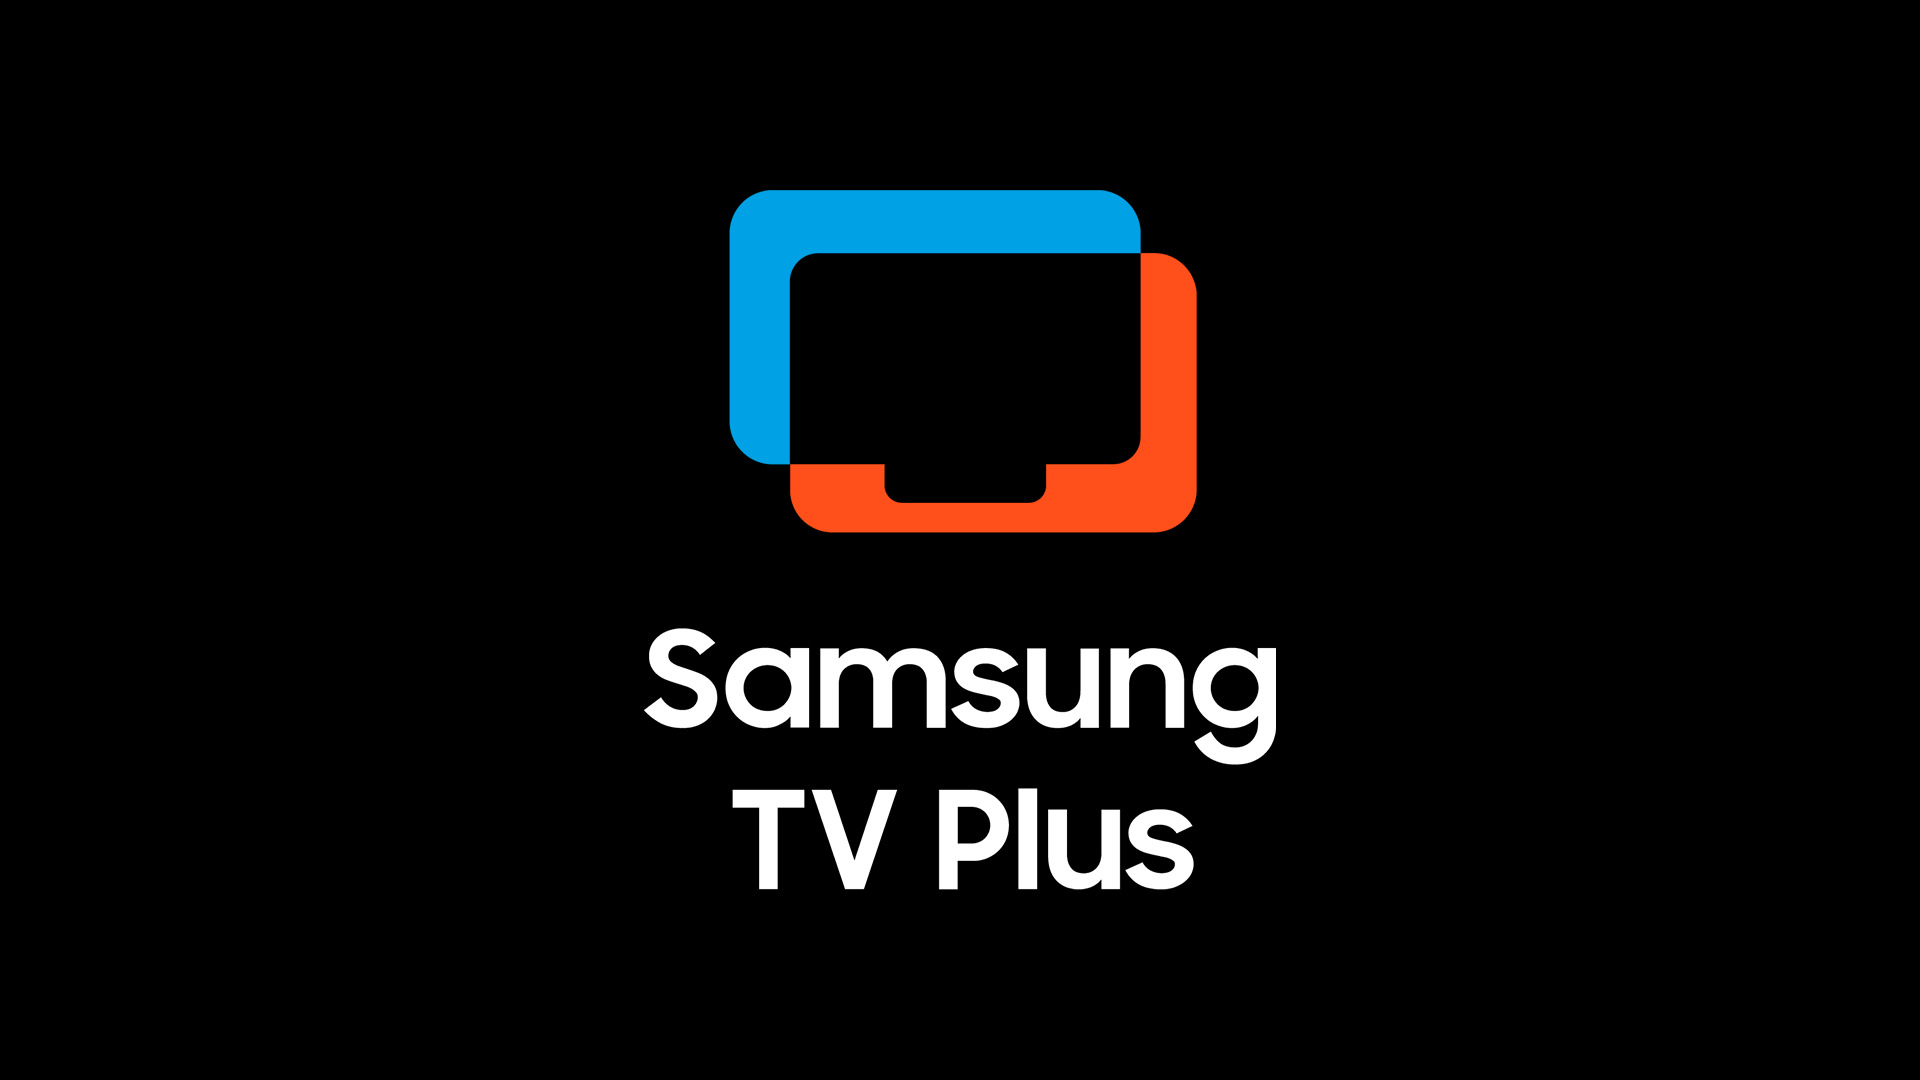 Samsung TV Plus Unveils its Holiday Schedule For Your Christmas Movie Marathons